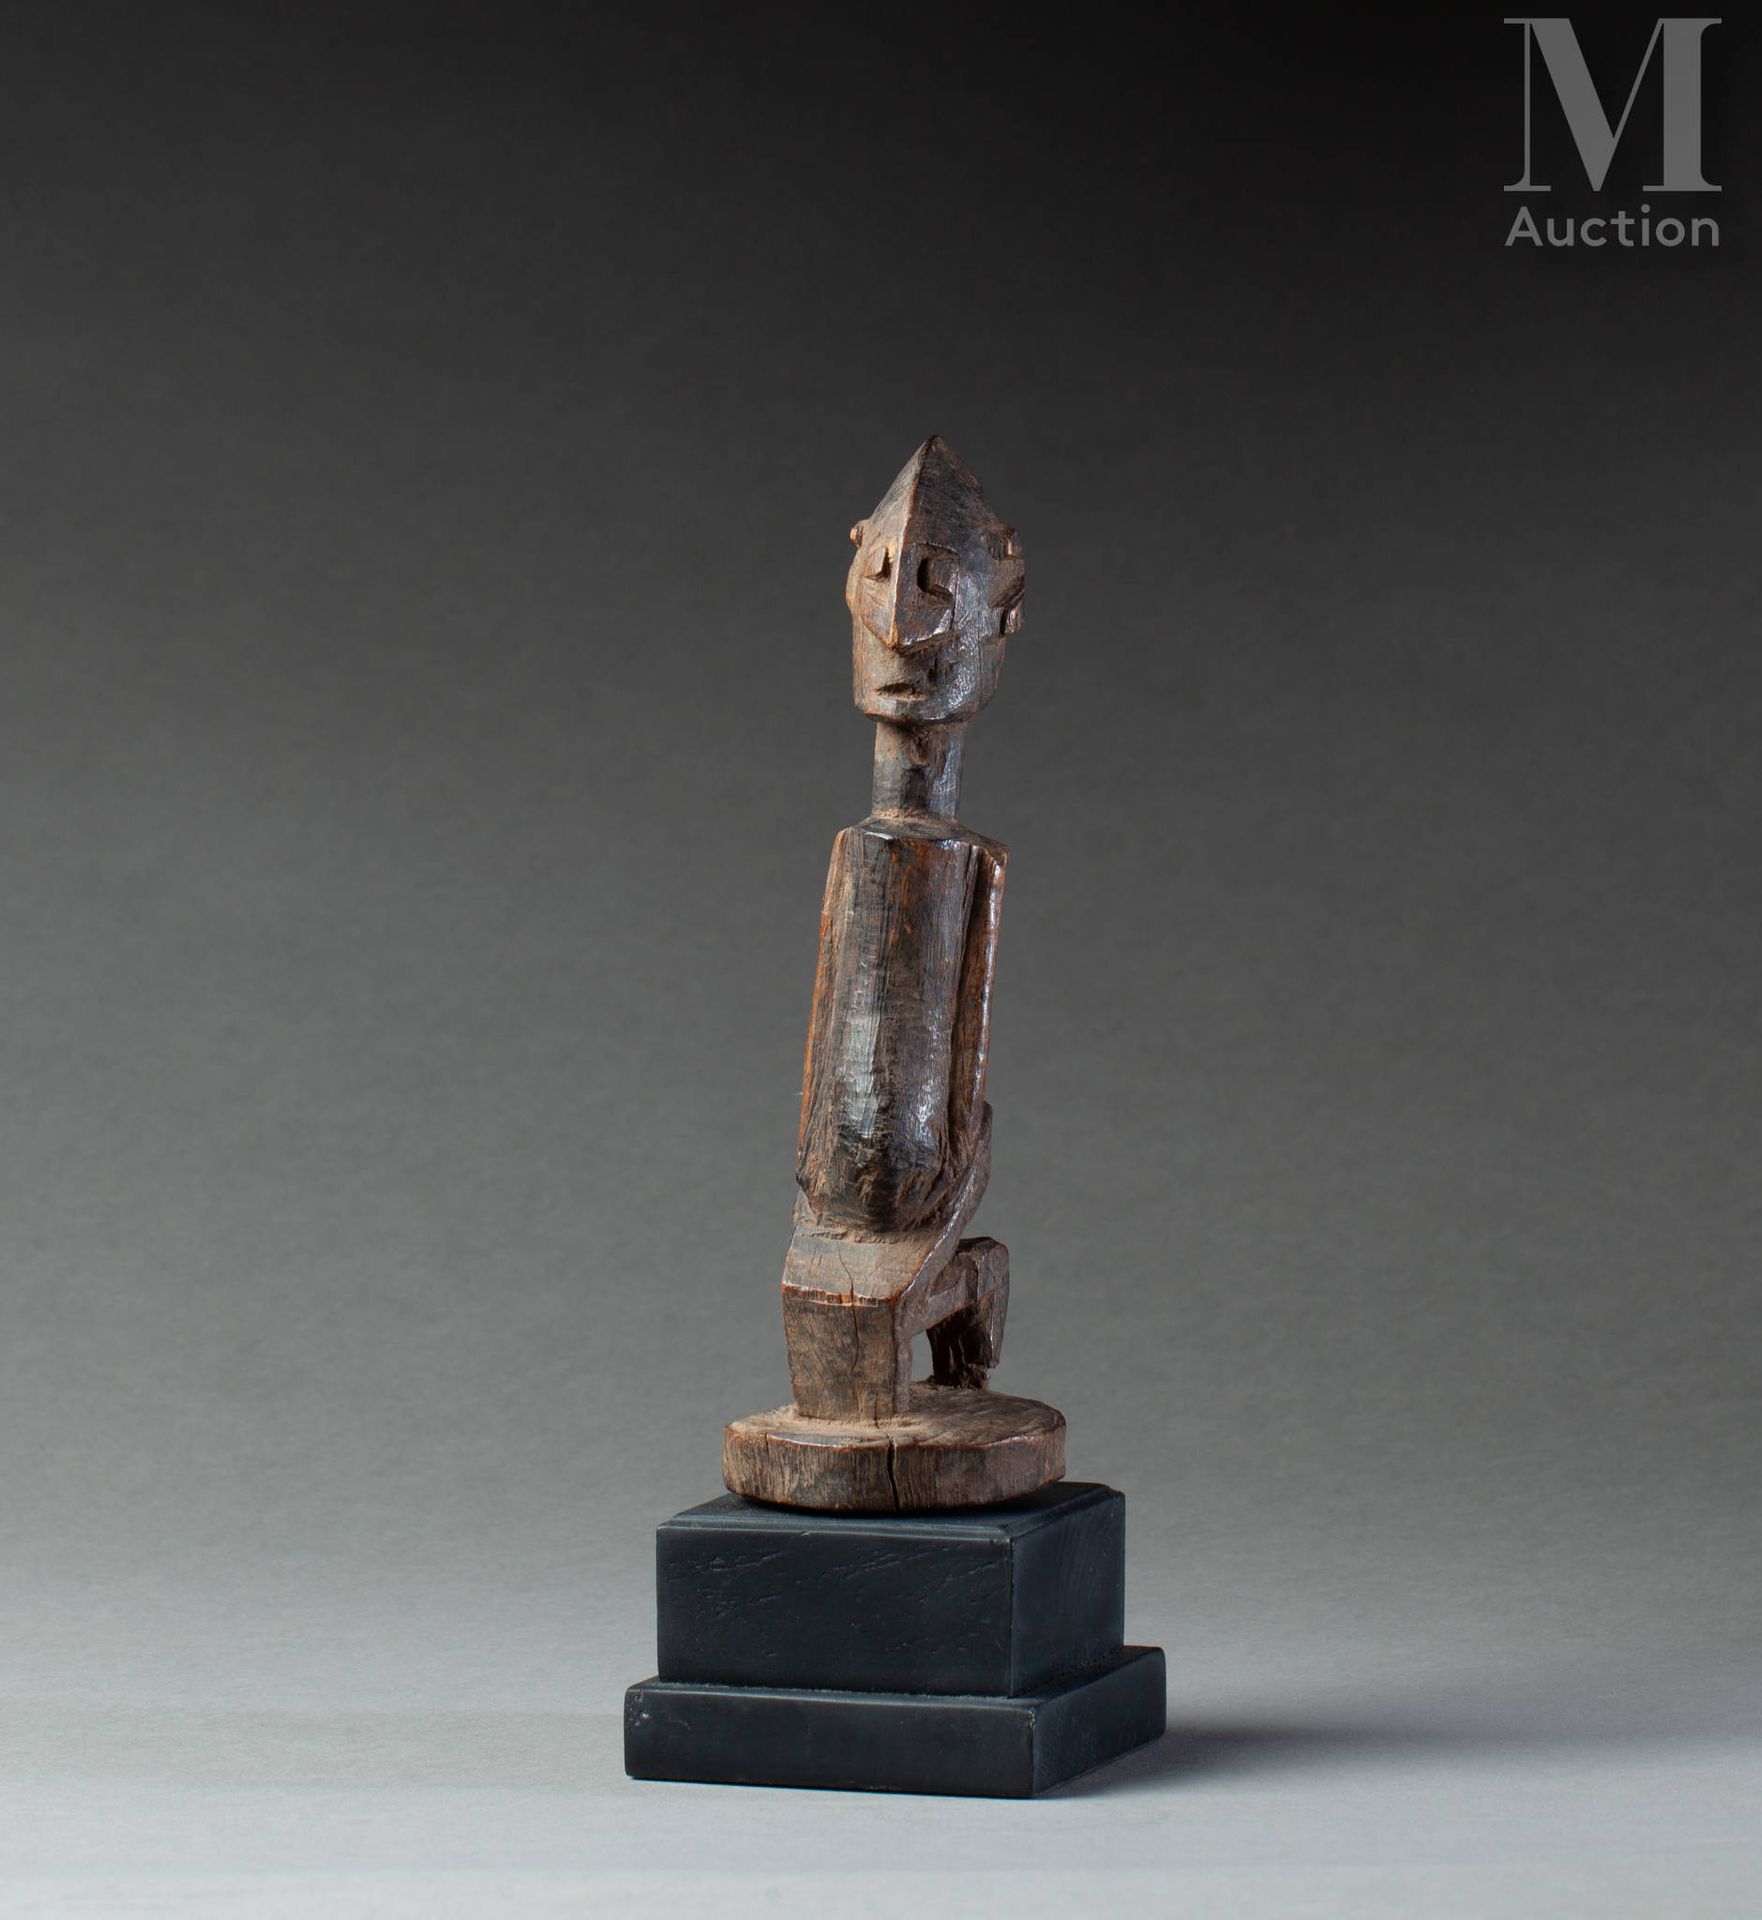 Statuette (Dogon) presenting a squatting character with long arms, animal ears a&hellip;